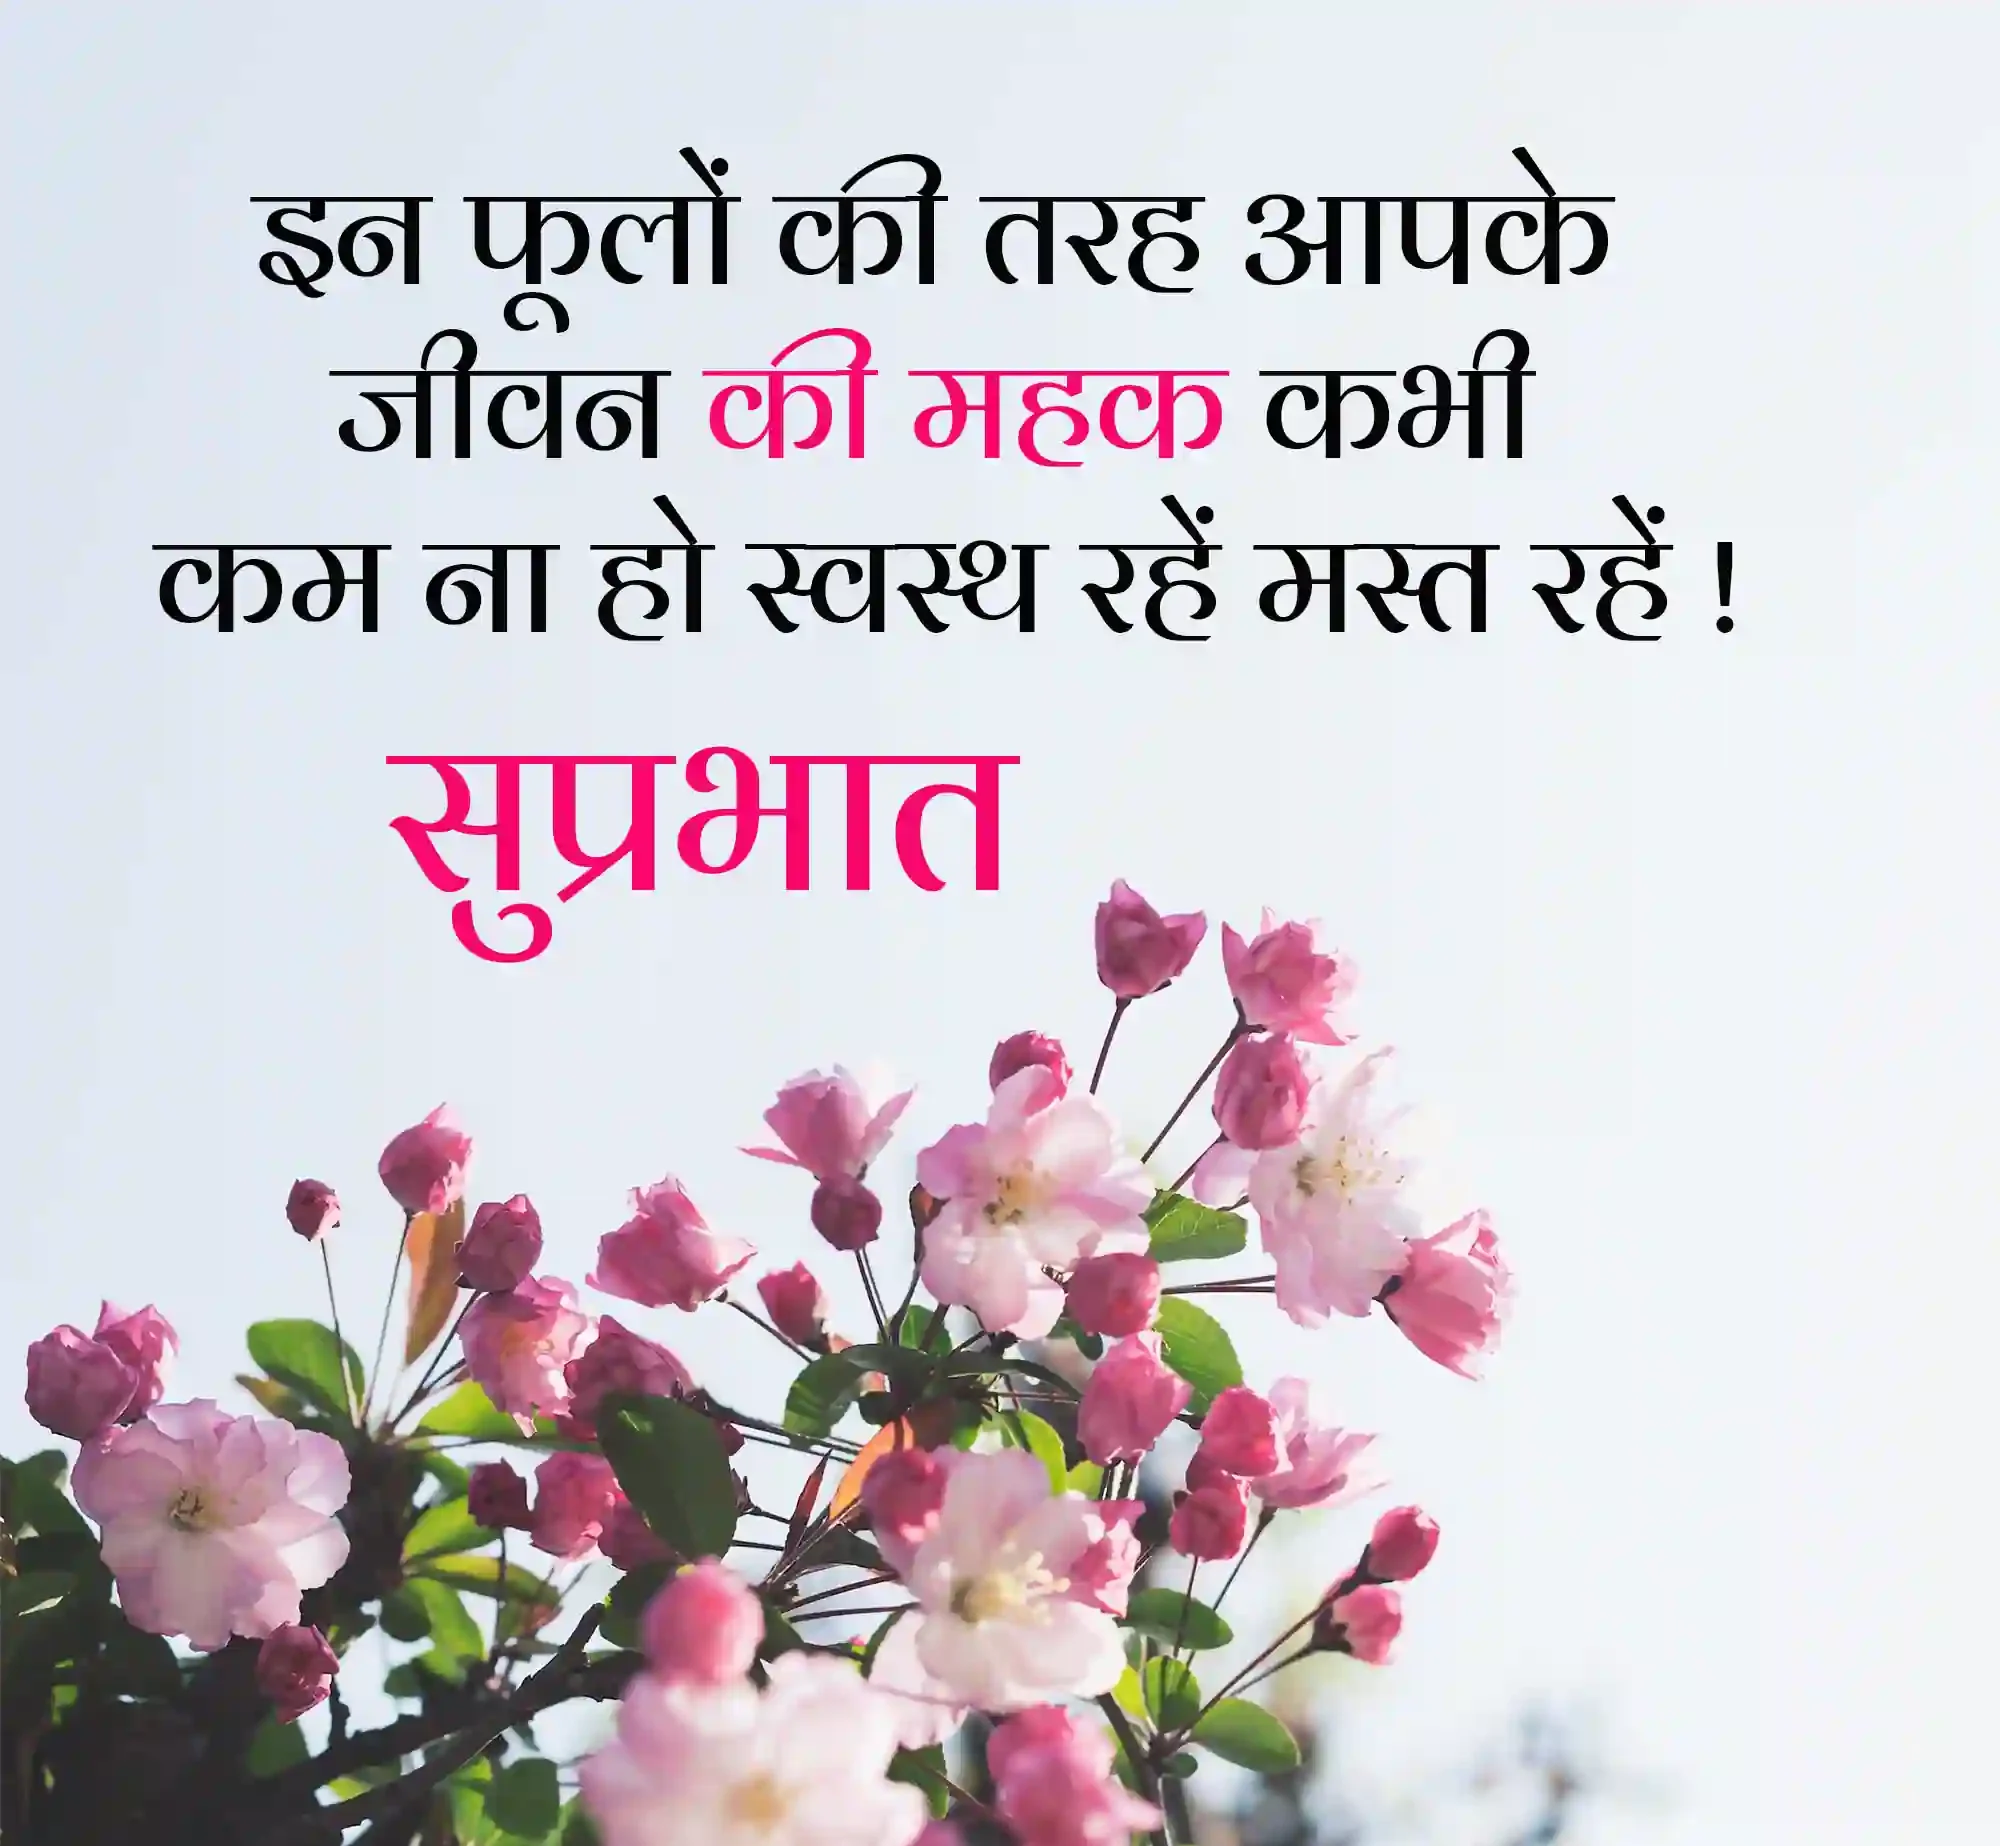 Good Morning Quotes in Hindi with Flower